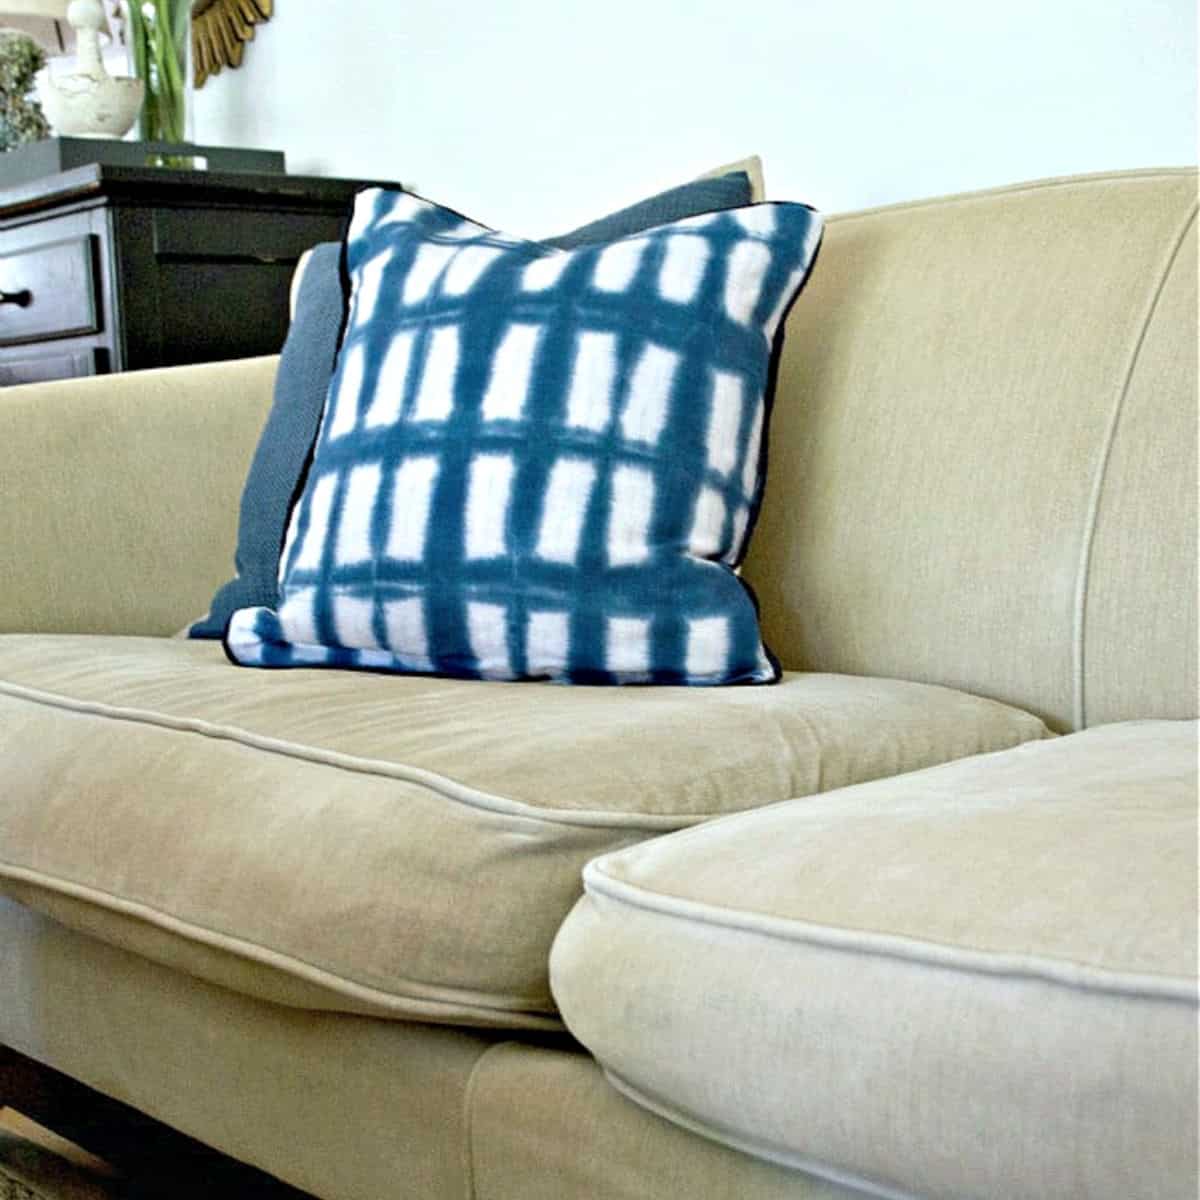 How To Fix Sagging Couch Cushions, How To Fix A Sagging Sofa Cushion